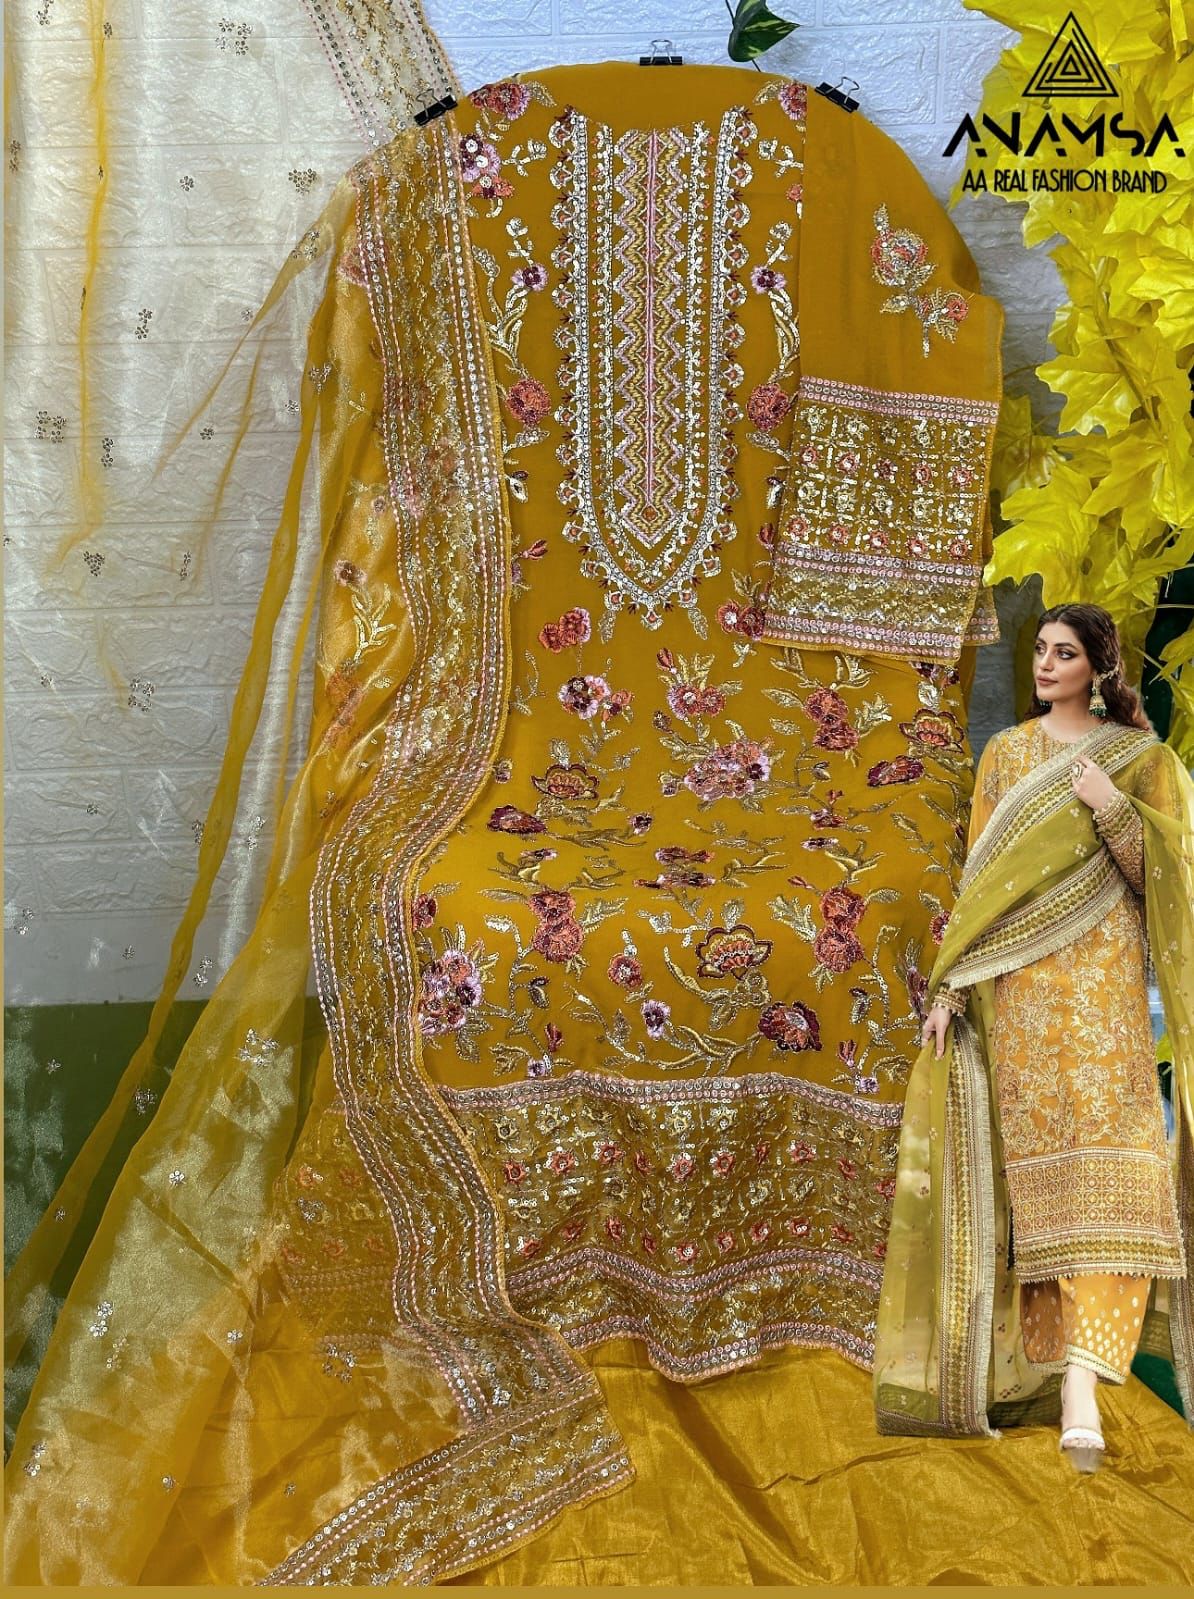 Anamsa 7773 D.no. 262 georgette with embroidery work pakistani georgette dress designs - jilaniwholesalesuit